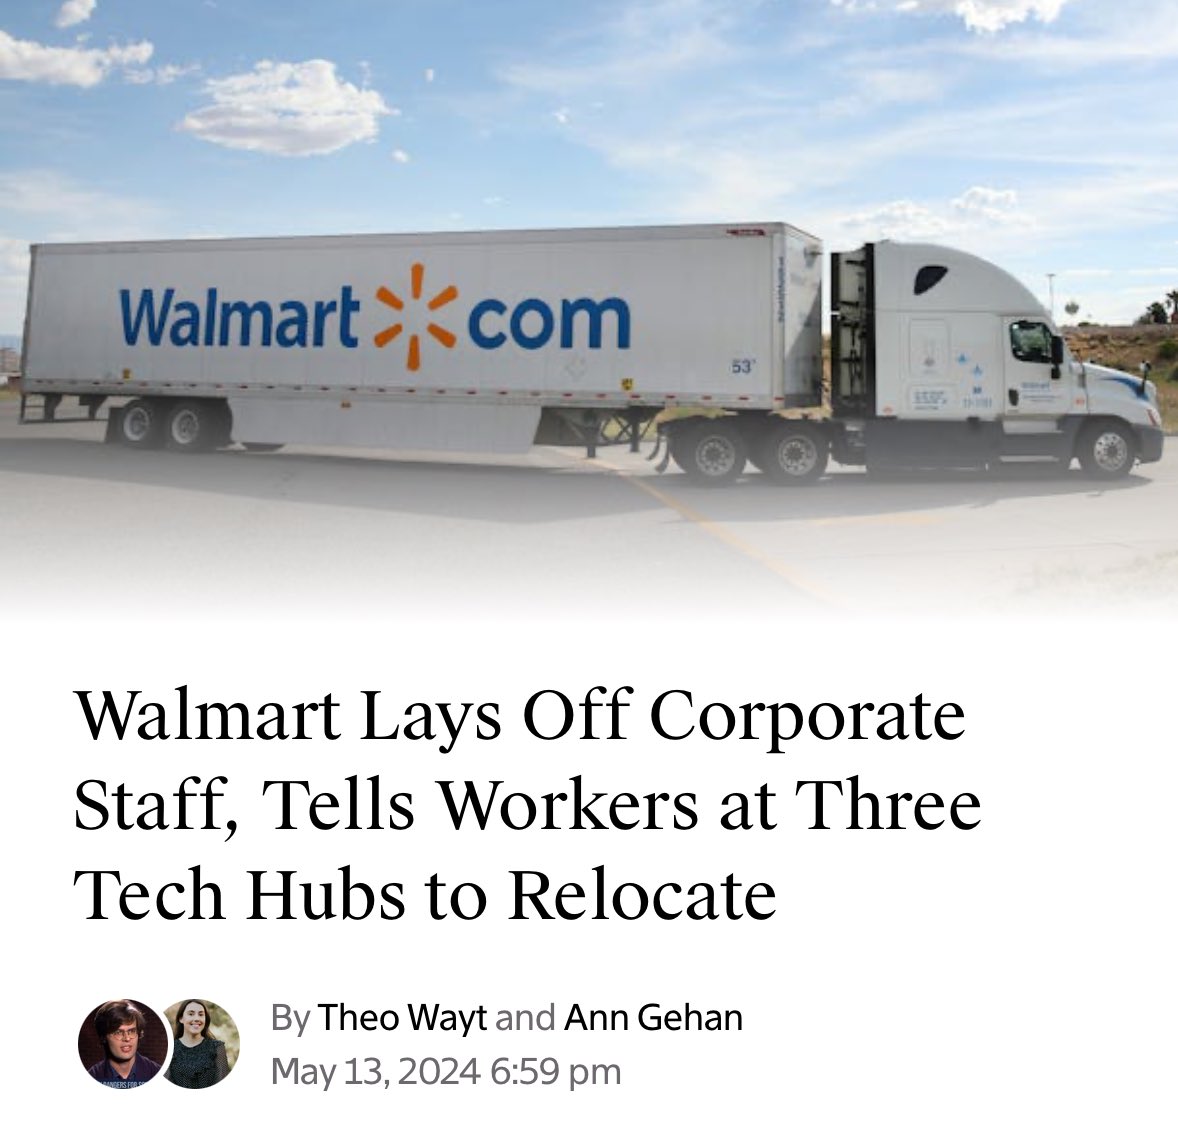 Walmart layoffs and relocations. Satellite offices are also on the chopping block